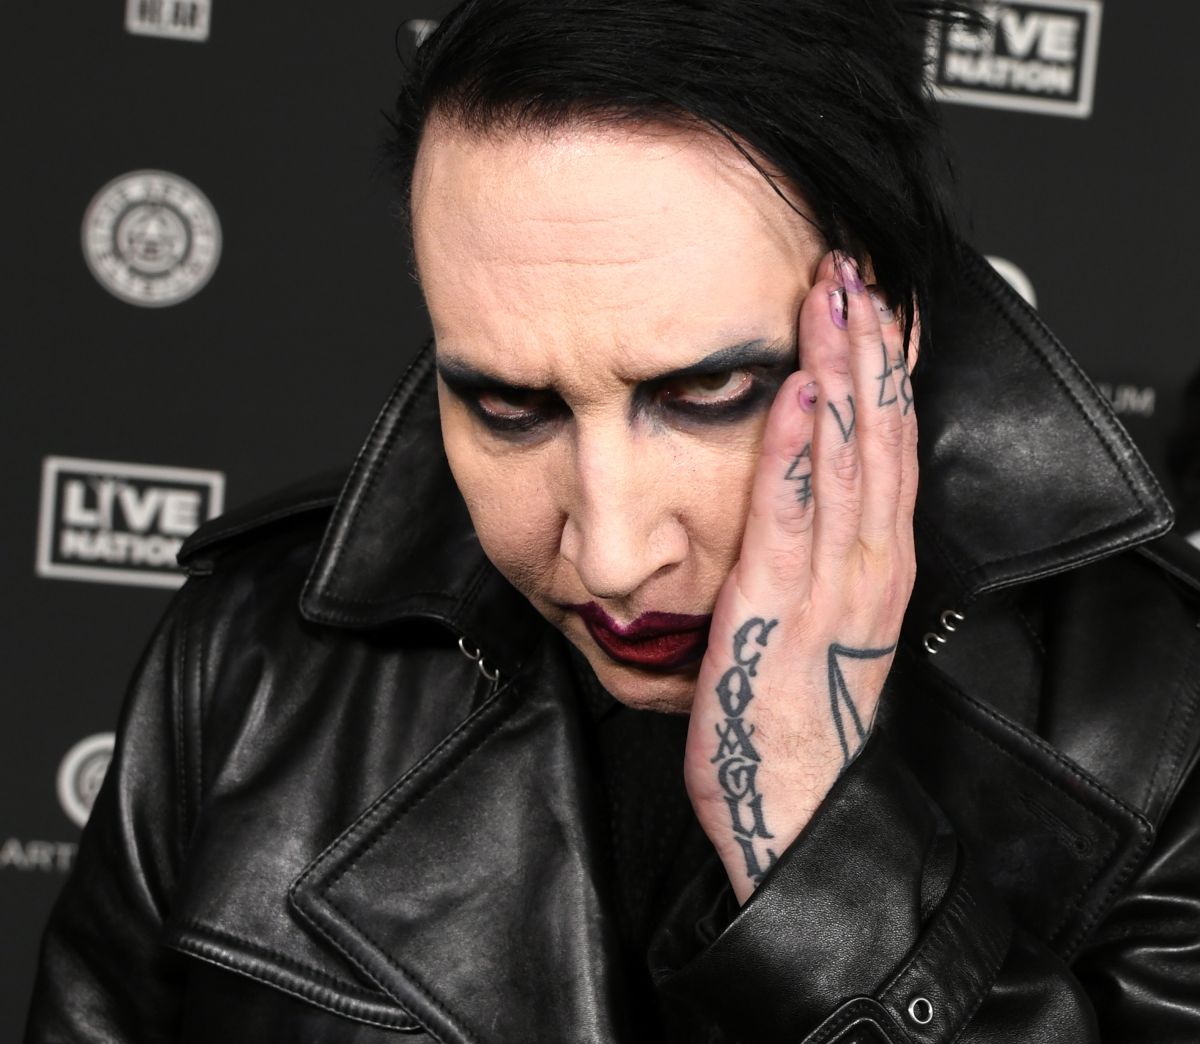 Marilyn Manson allegedly abused women in a soundproof room he built in his house